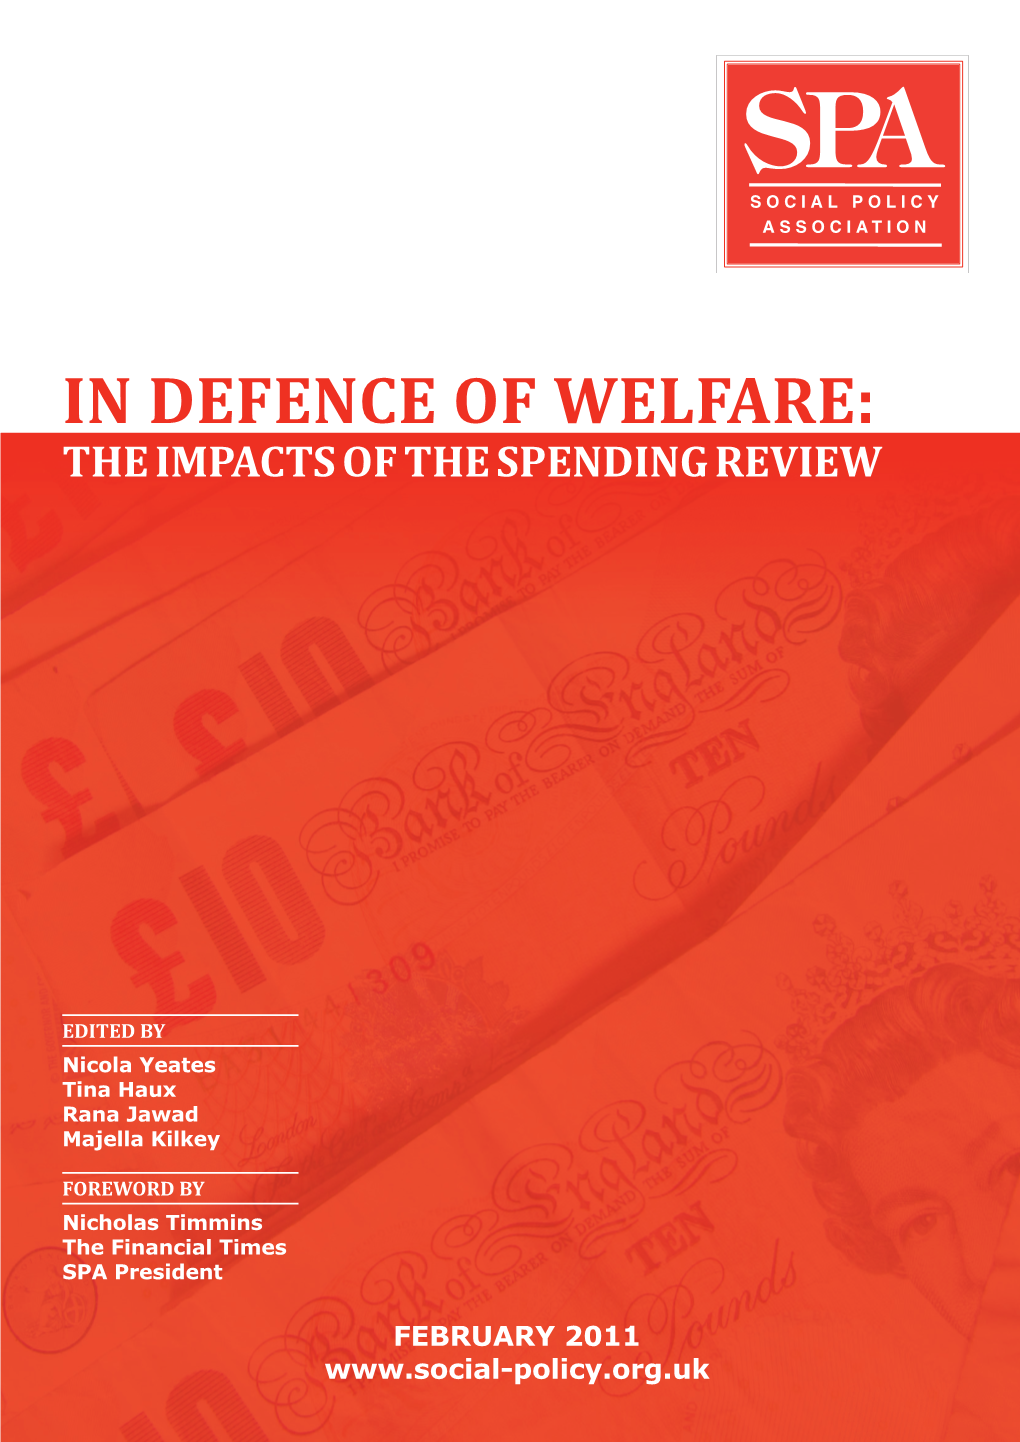 In Defence of Welfare: the Impacts of the Spending Review